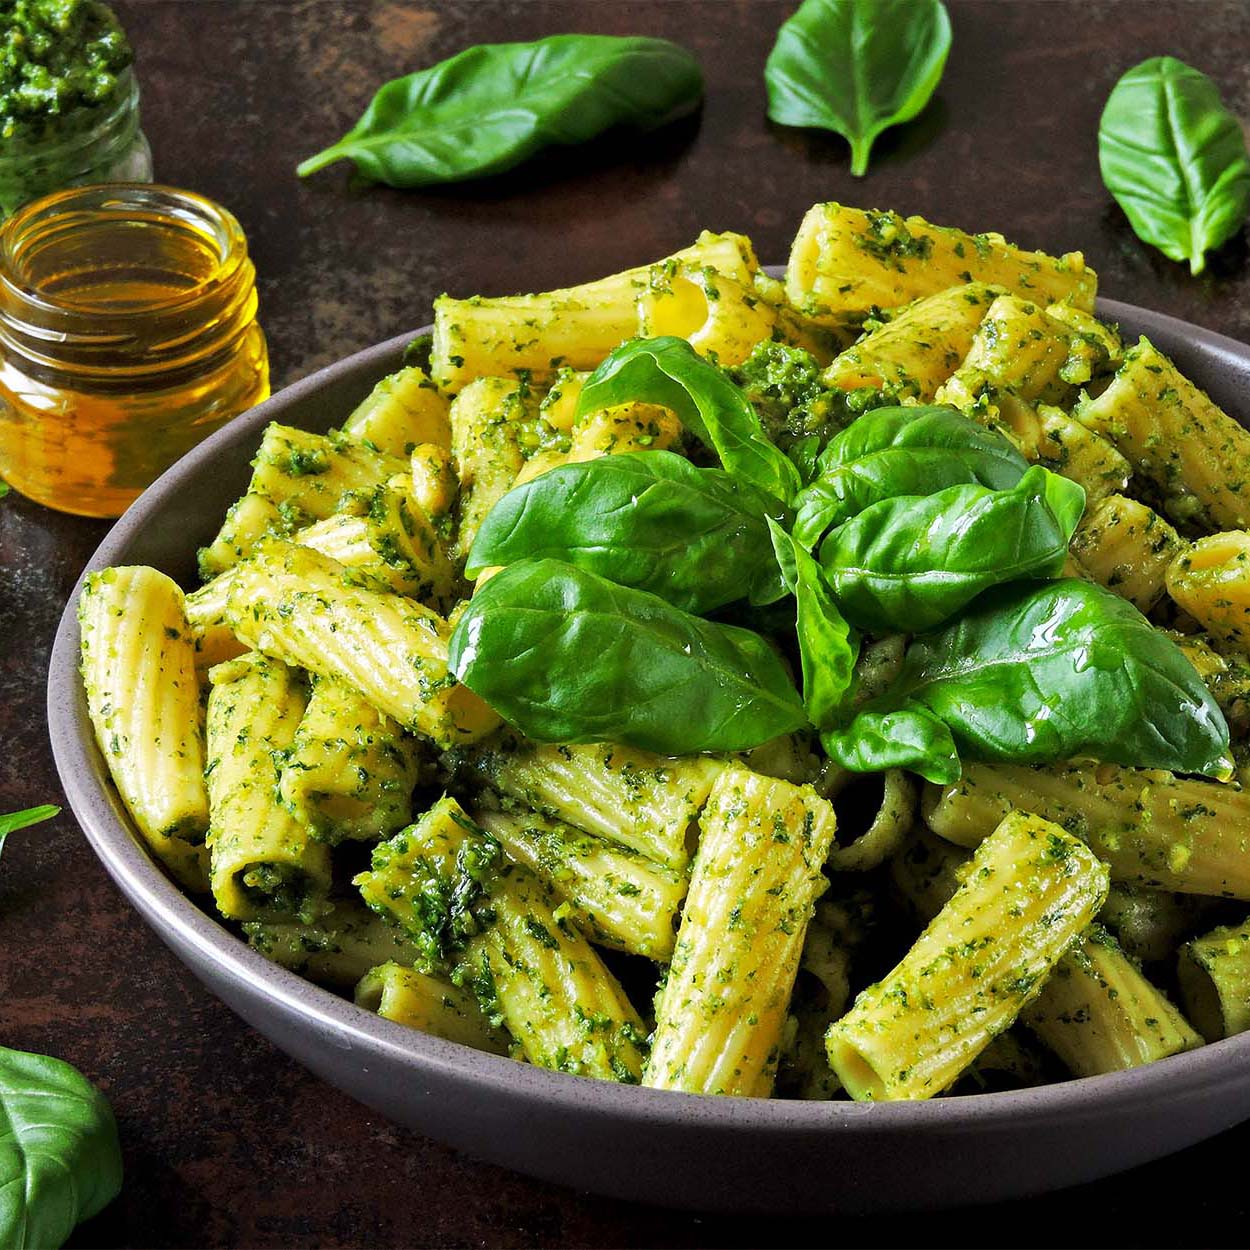 Close up of a gray bowl filled with penne rigate pasta and pesto sauce garnished with fresh basil leaves